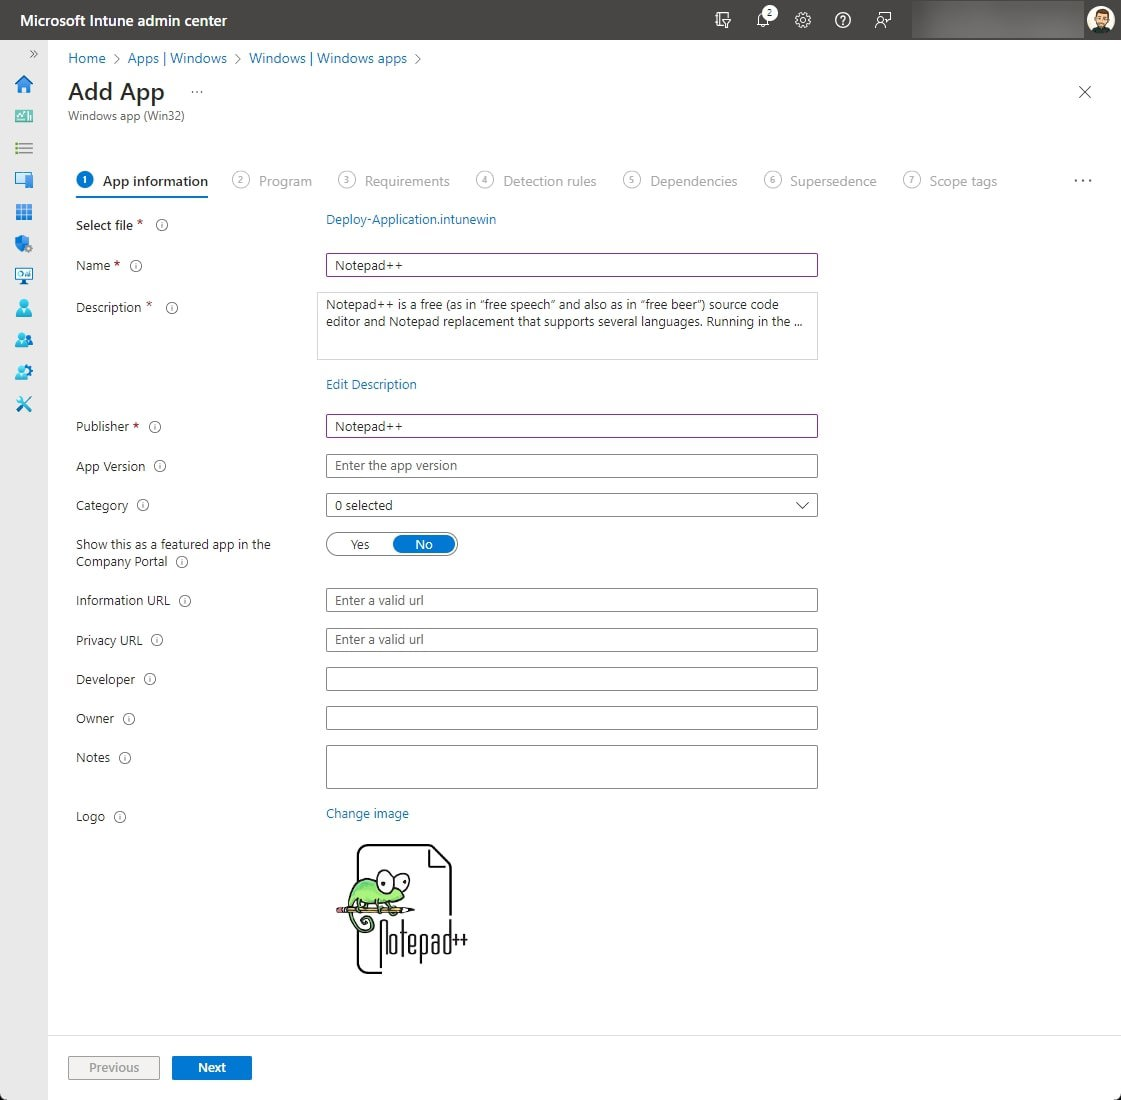 This screenshot shows the application information in Intune. It includes the name, which is Notepad++, a description, and a logo of it.